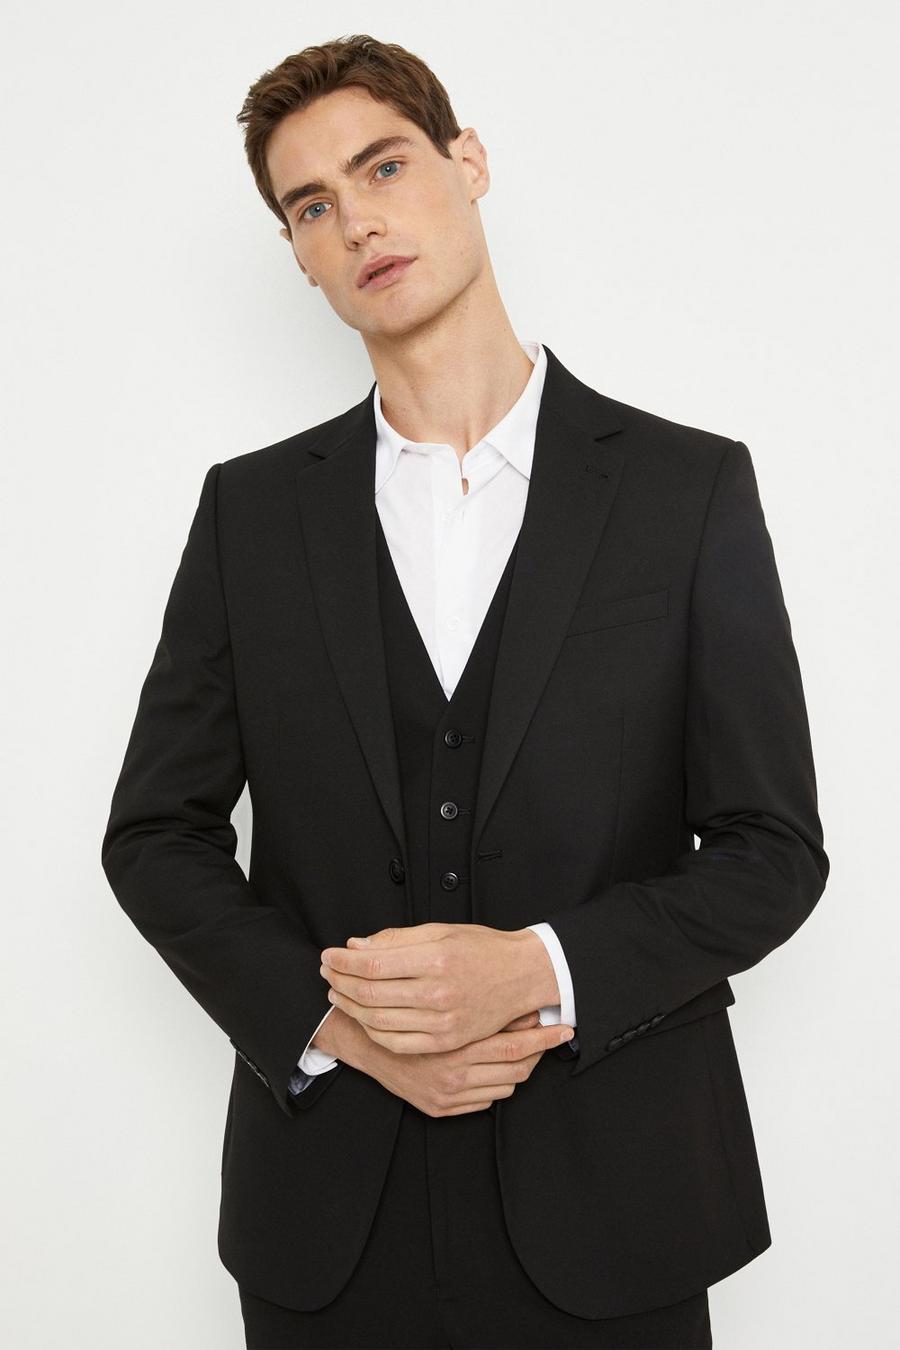 Plus And Tall Tailored Black Three - Piece Suit